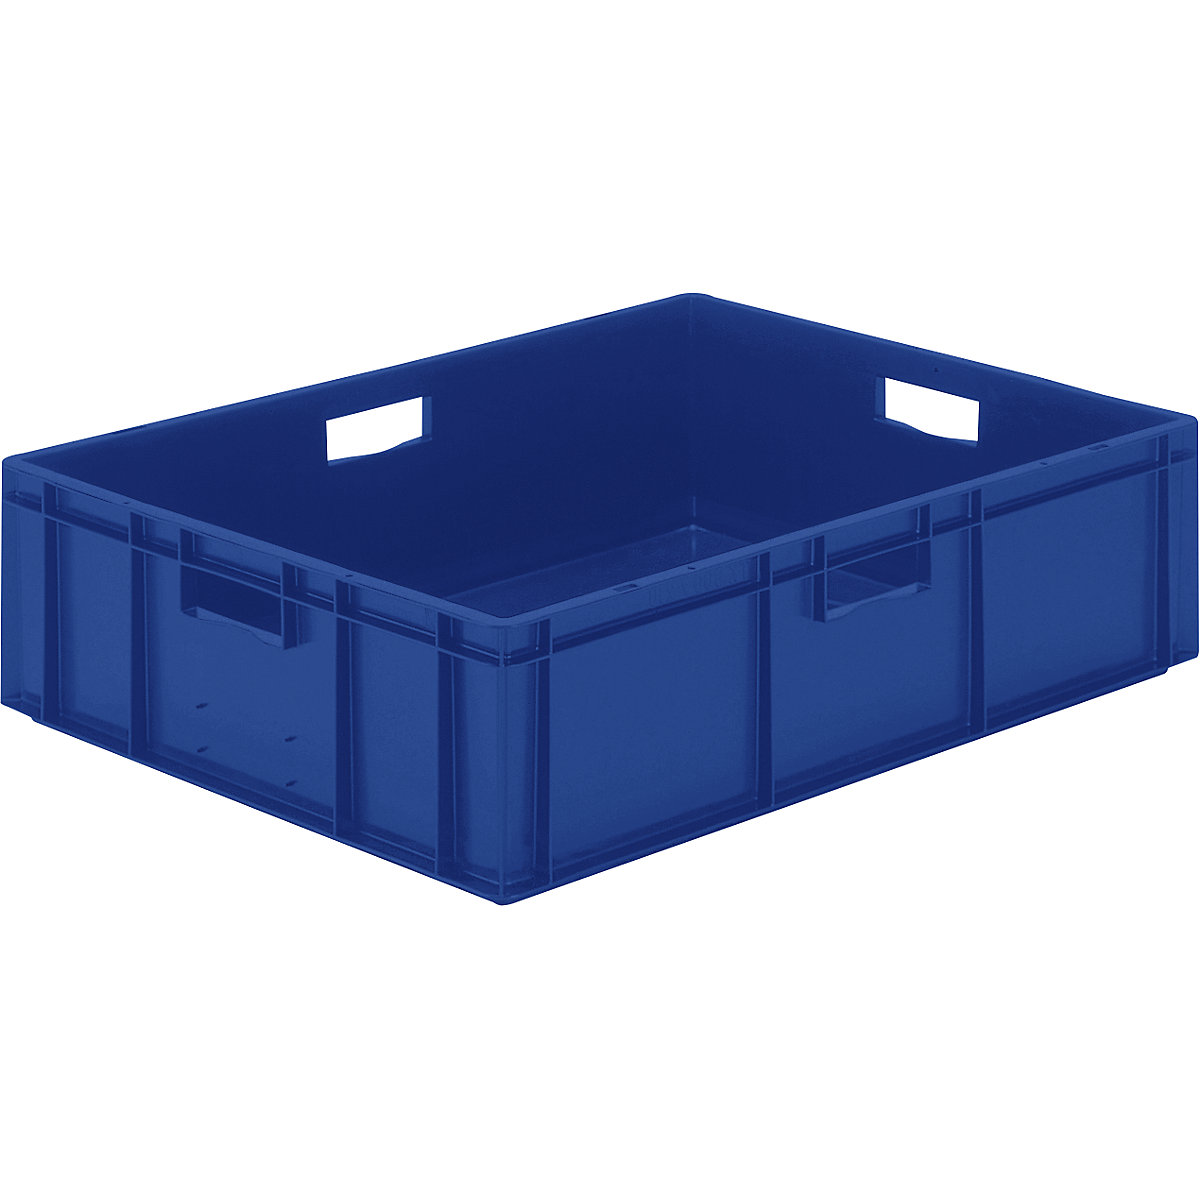 Euro stacking container, closed walls and base, LxWxH 800 x 600 x 210 mm, blue, pack of 2-5